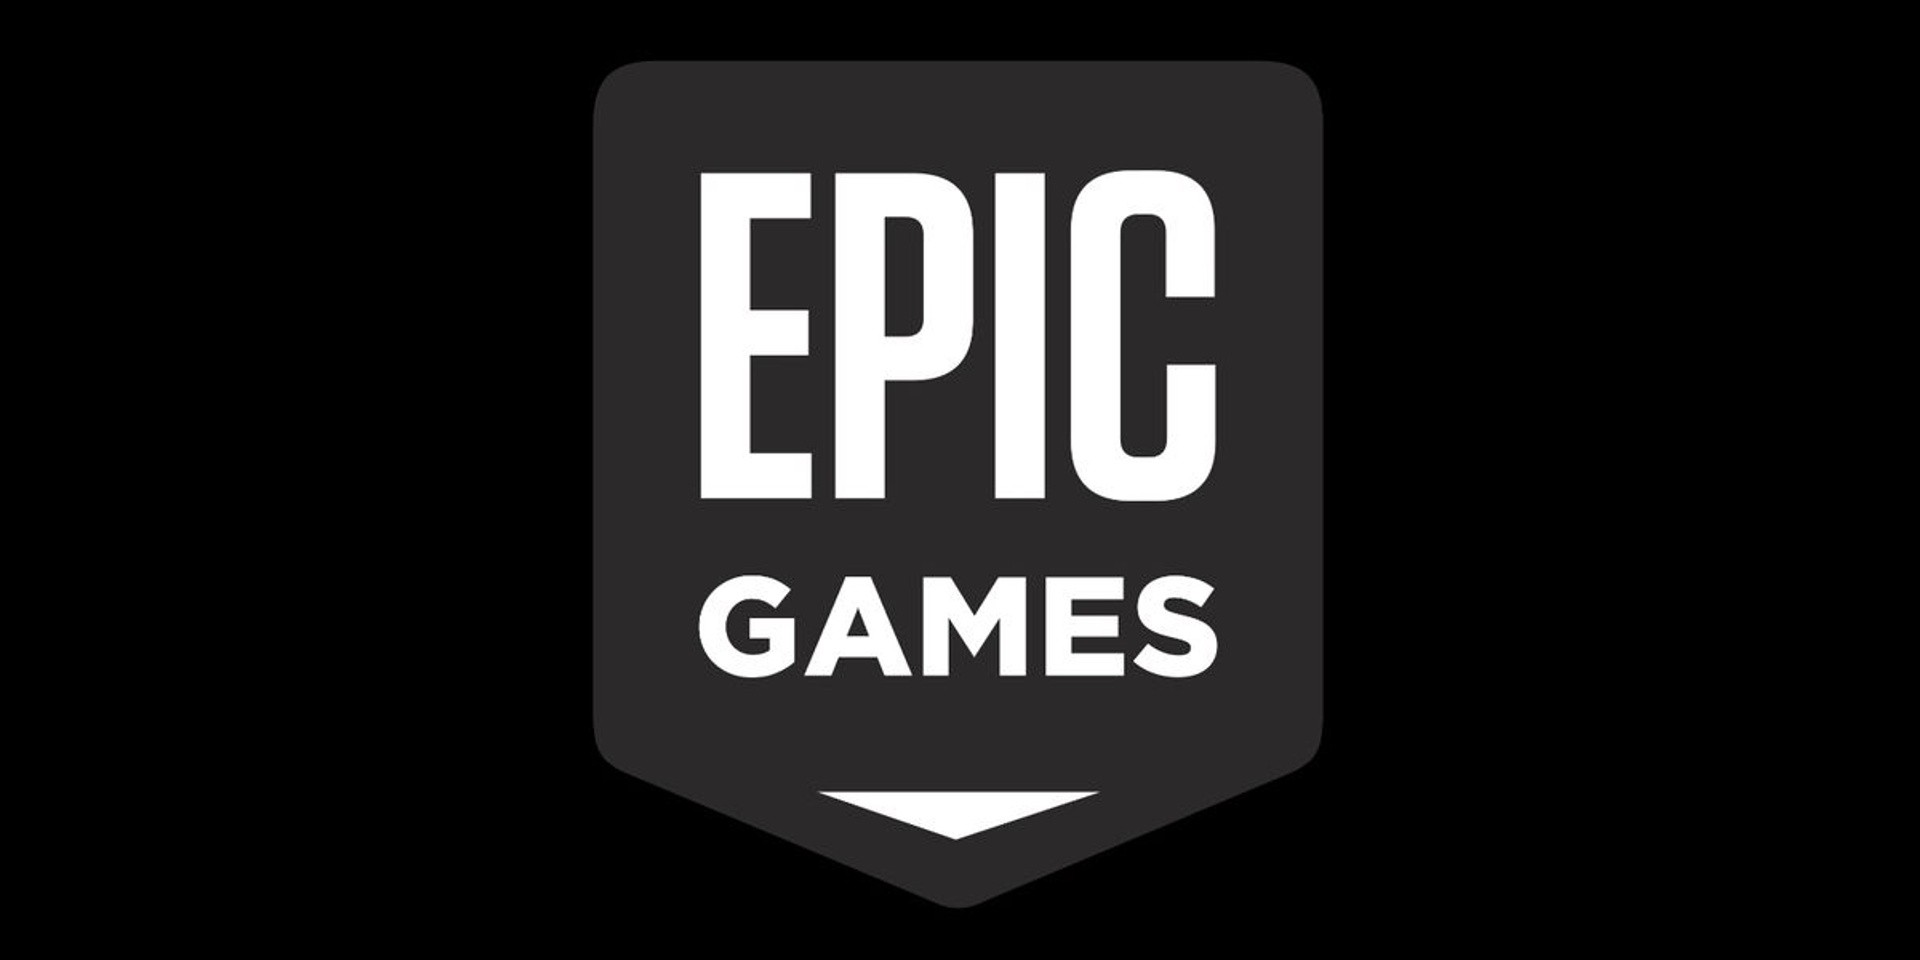 Sony and LEGO invest in Epic Games' $2 billion project to build metaverse